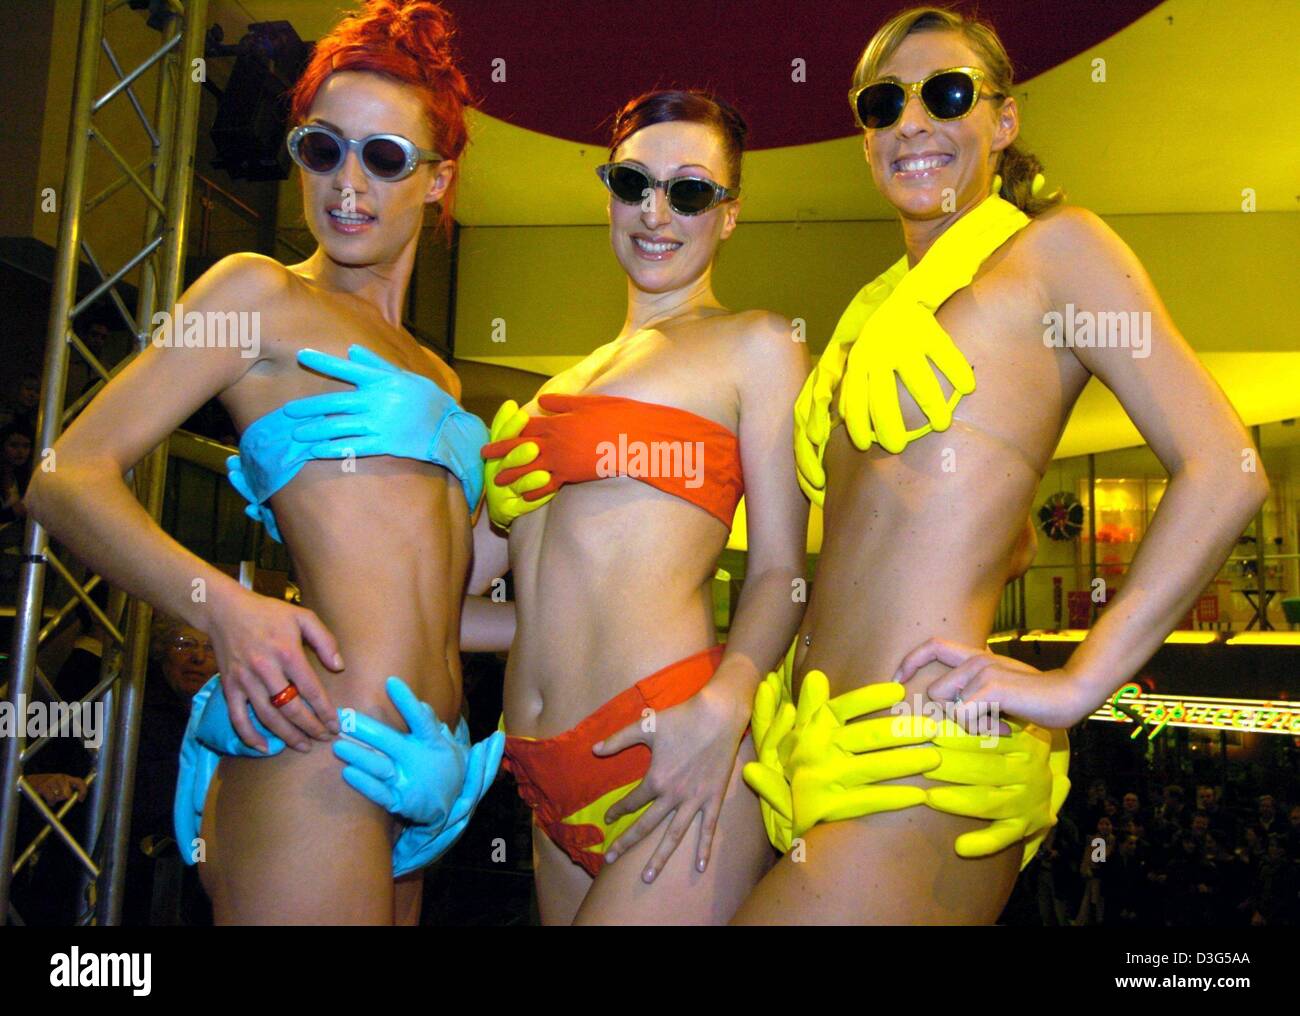 Dpa Scantily Clad Models Wear Conventional Rubber